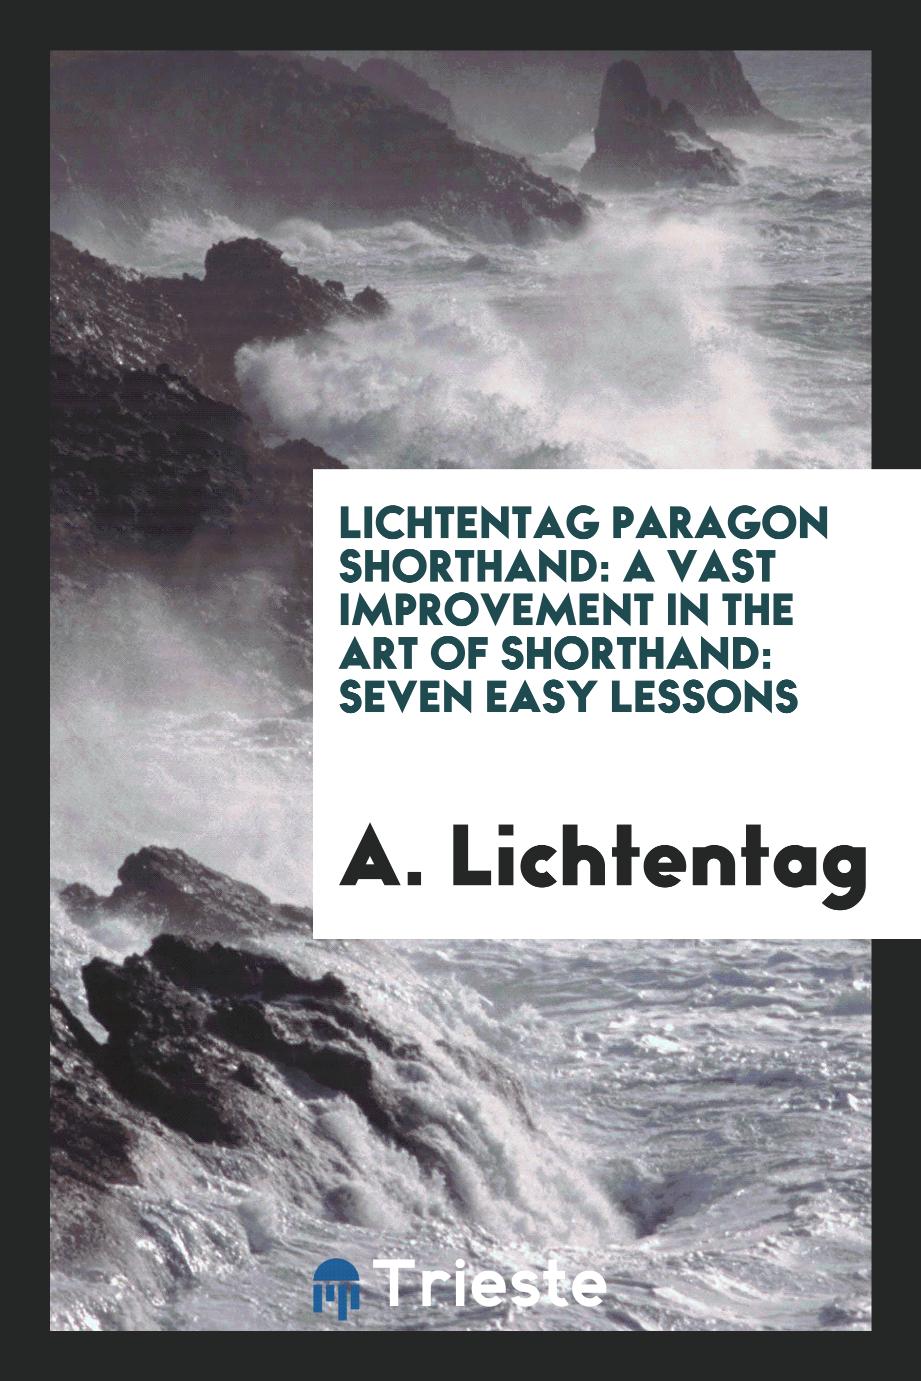 Lichtentag Paragon Shorthand: A Vast Improvement in the Art of Shorthand: Seven Easy Lessons